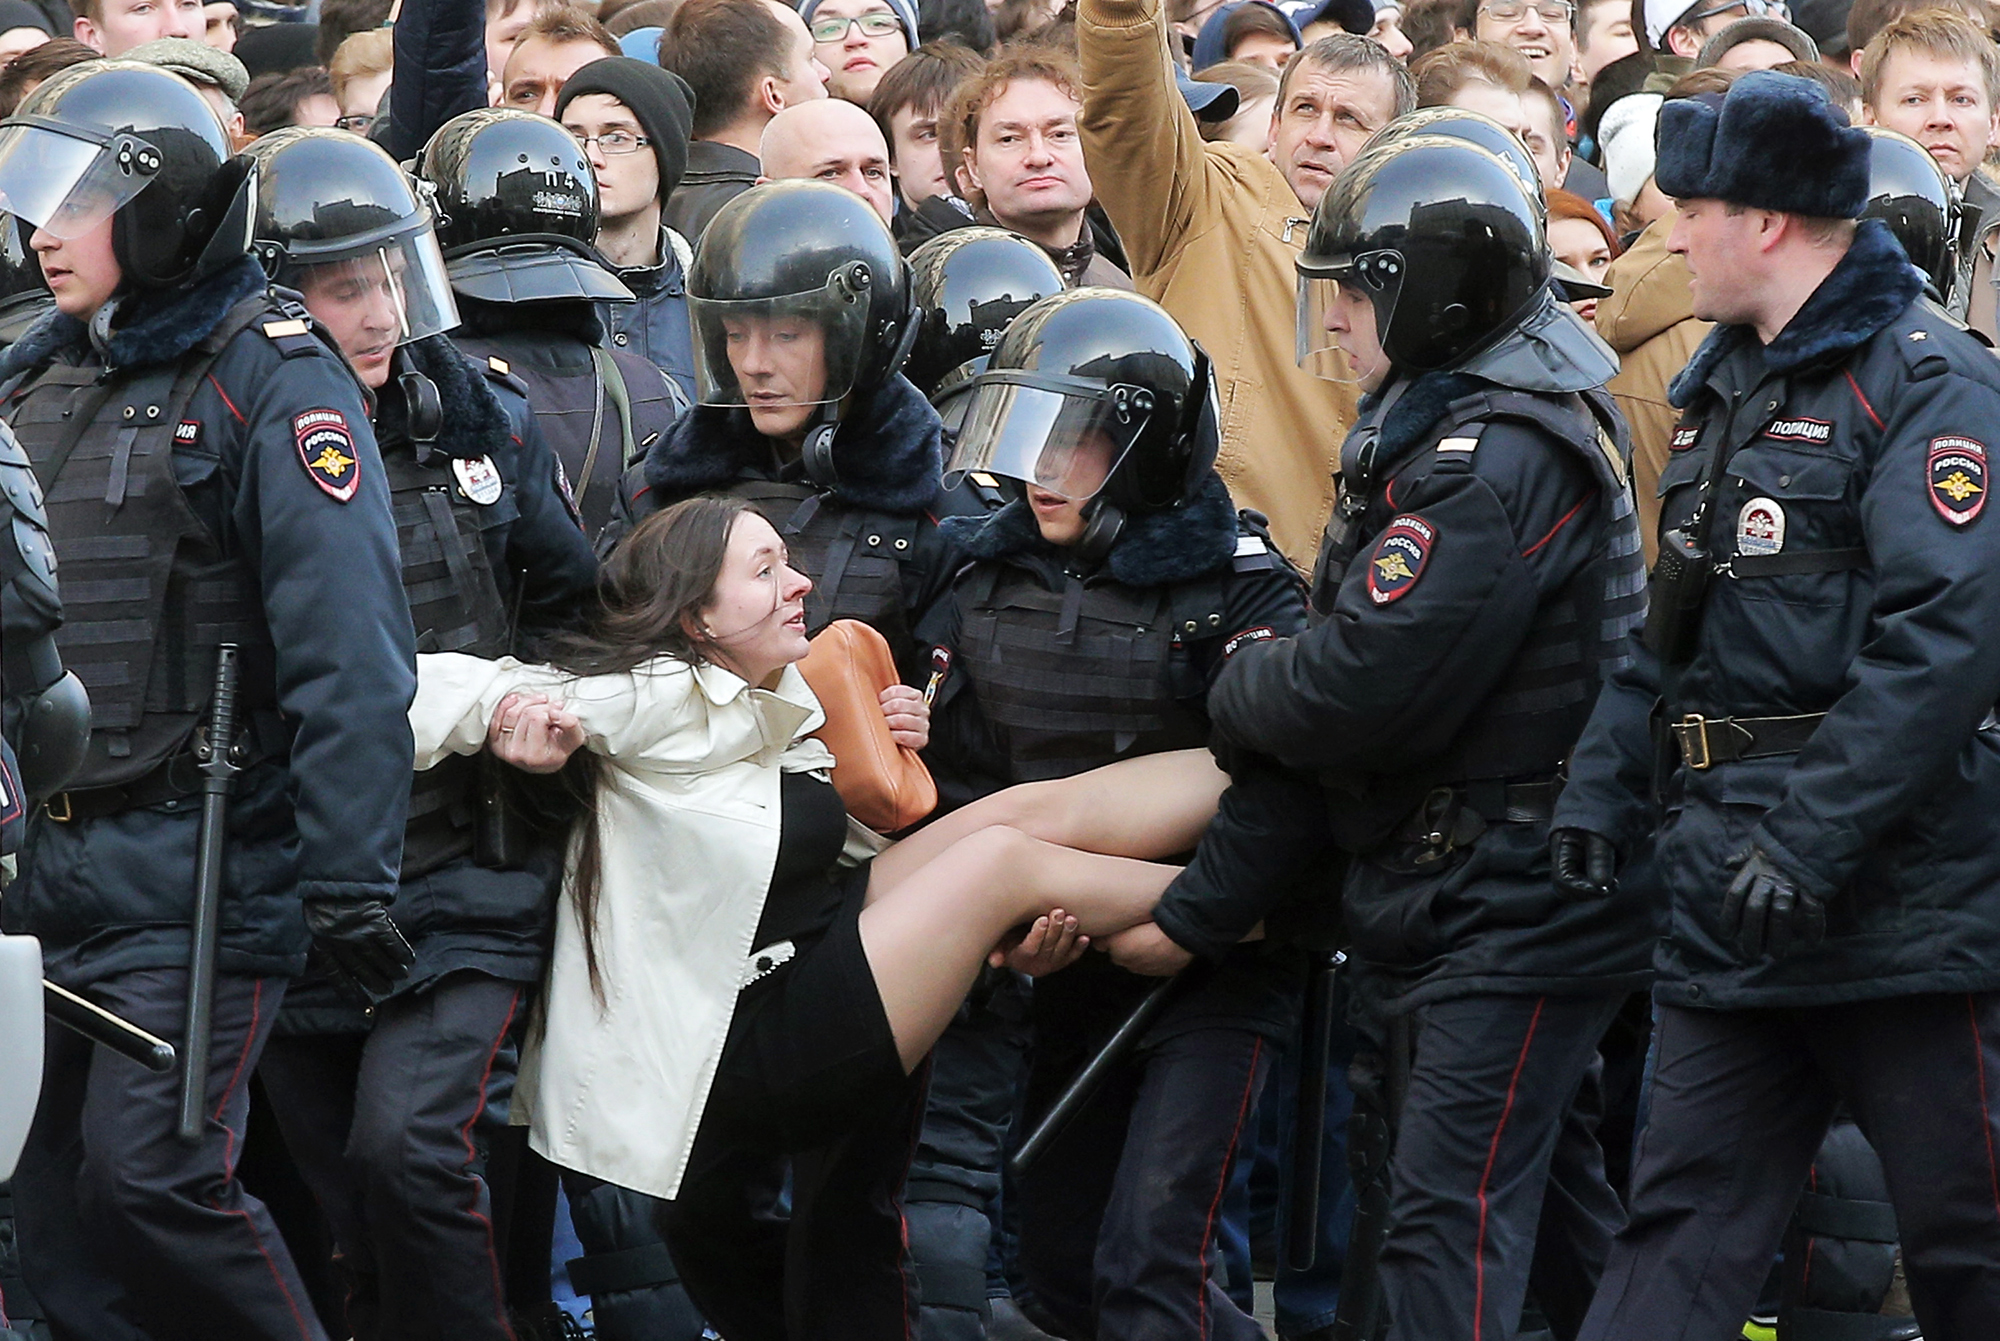 Police officers detain a demonstrator during an opposition rally in Moscow on March 26, 2017.